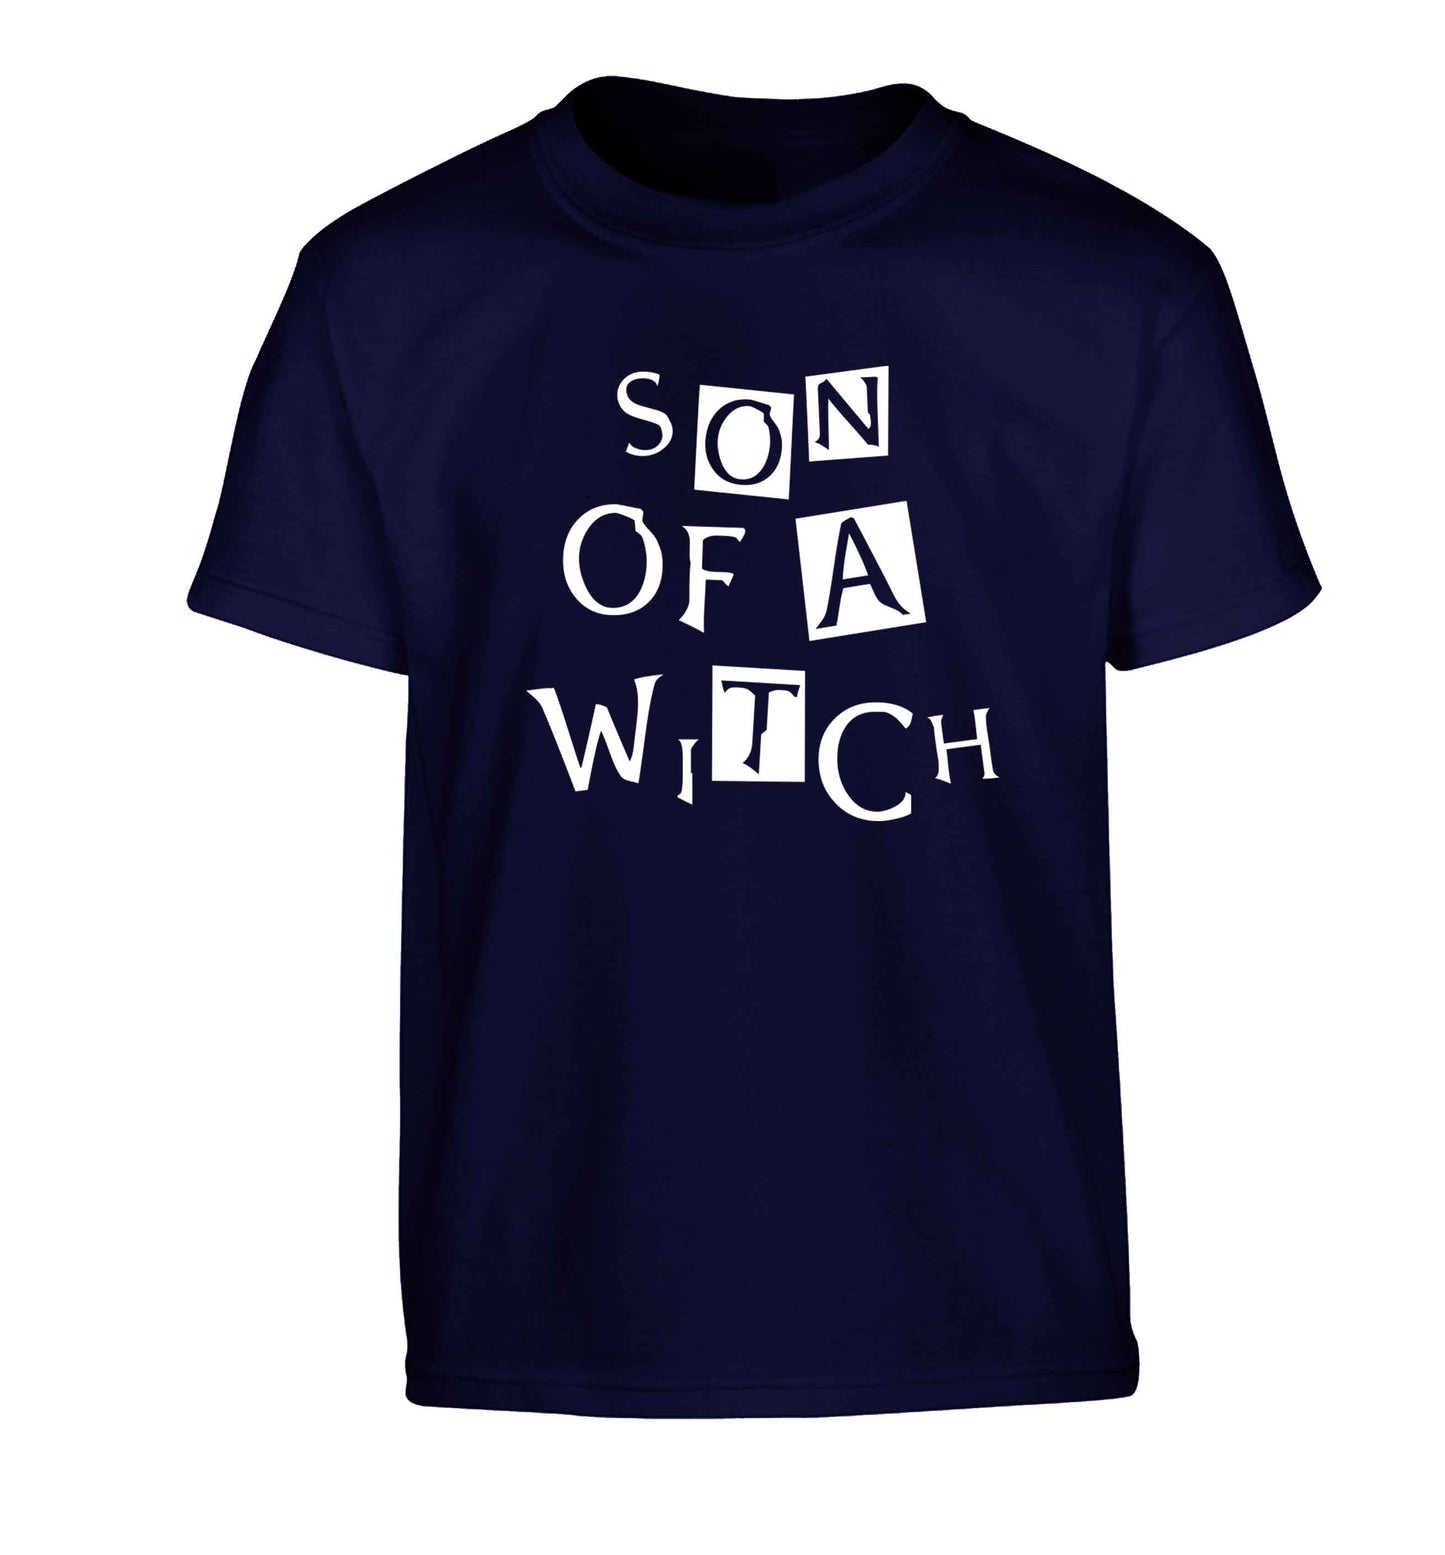 Son of a witch Children's navy Tshirt 12-13 Years